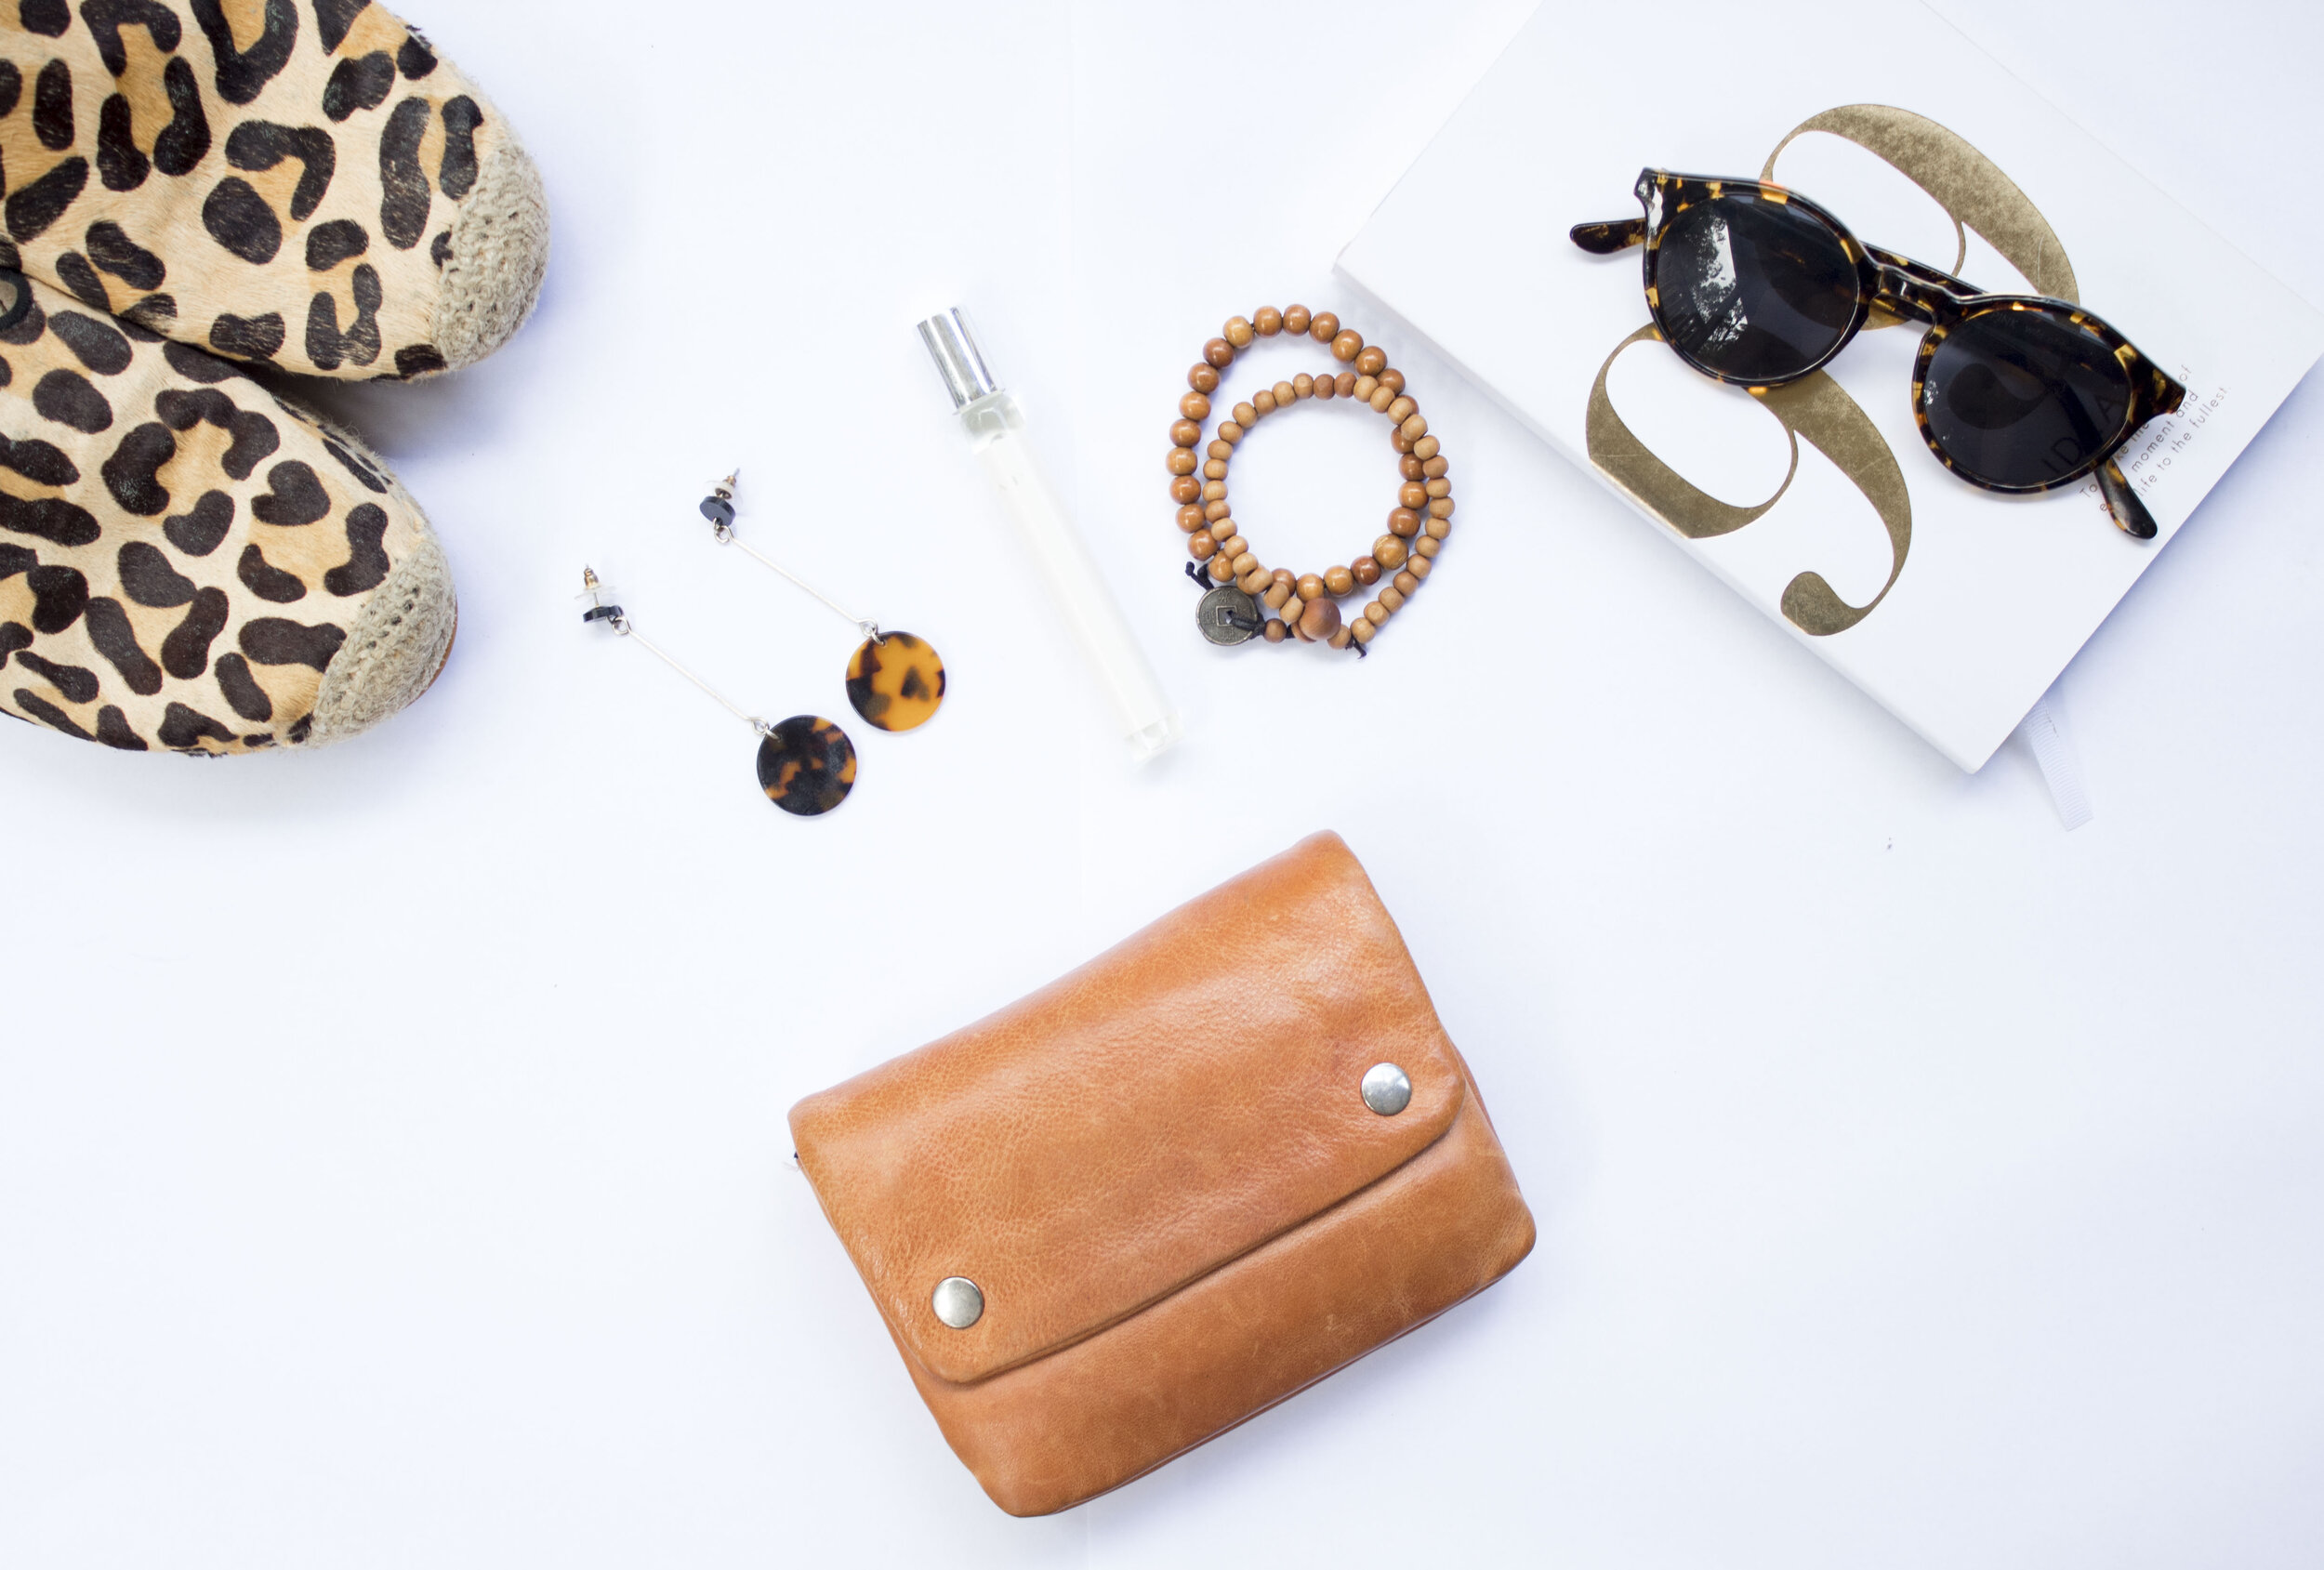 All about styling accessories. — Loftis Productions